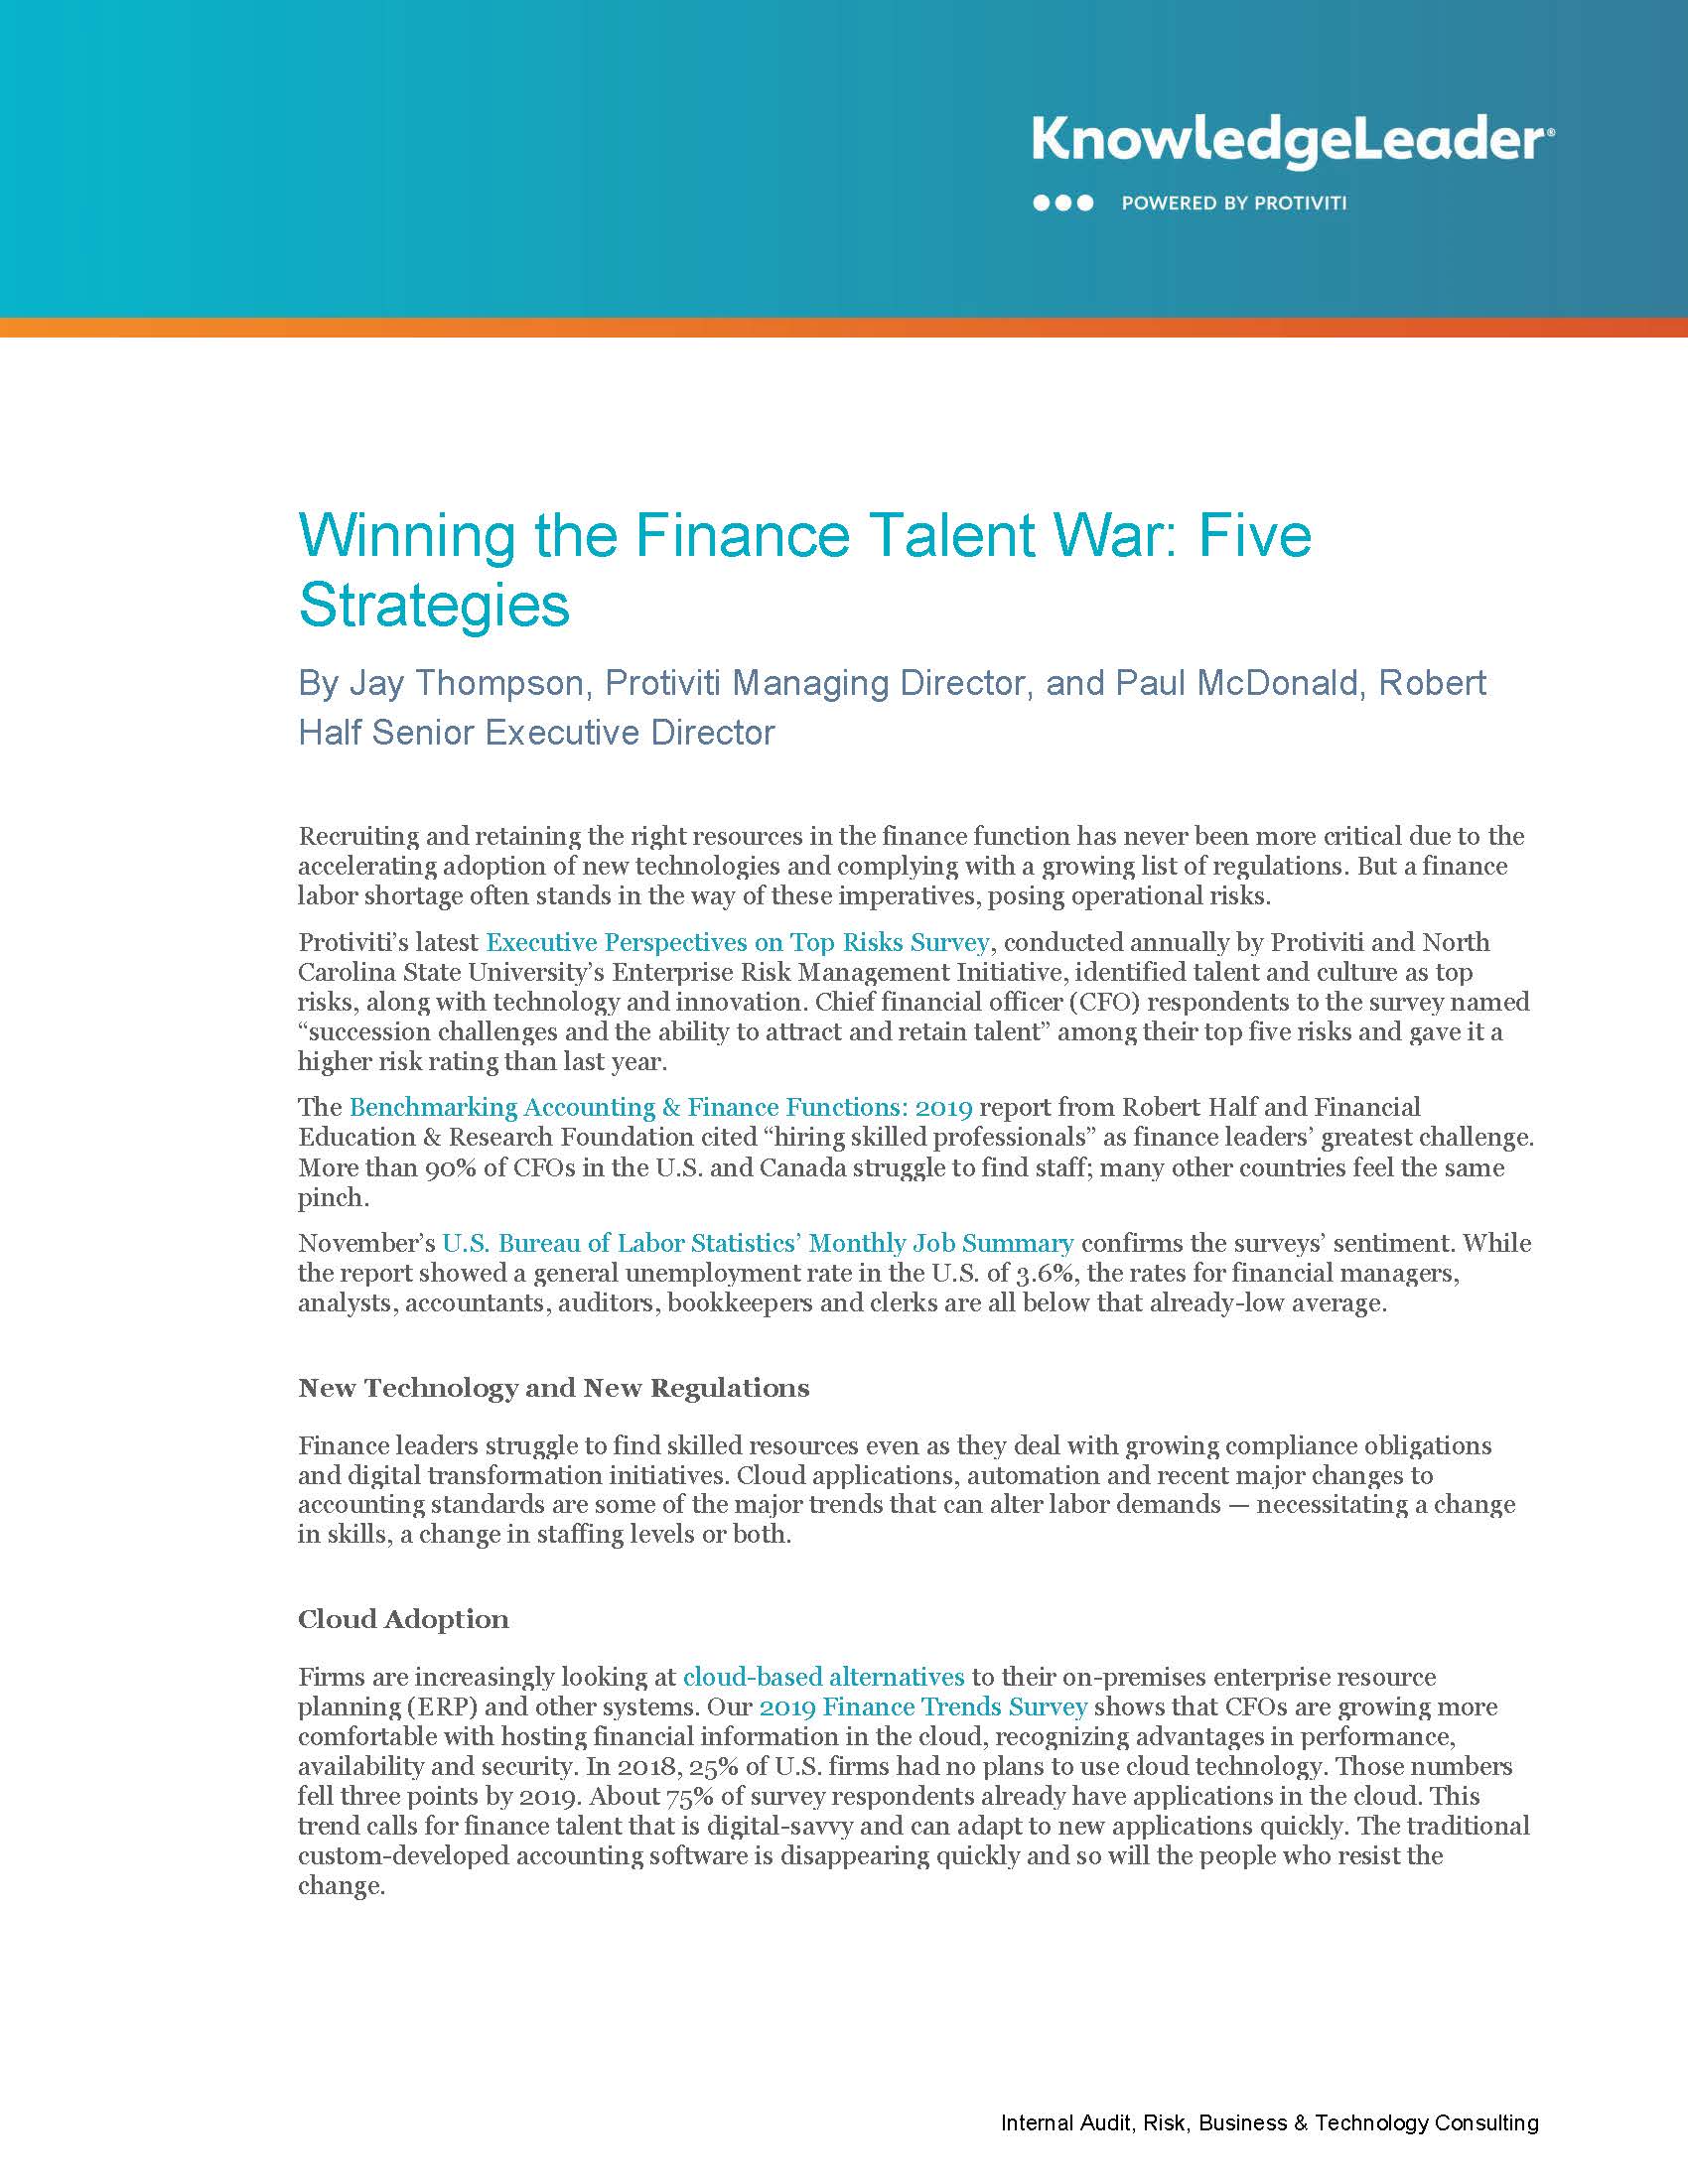 Screenshot of the first page of Winning the Finance Talent War Five Strategies